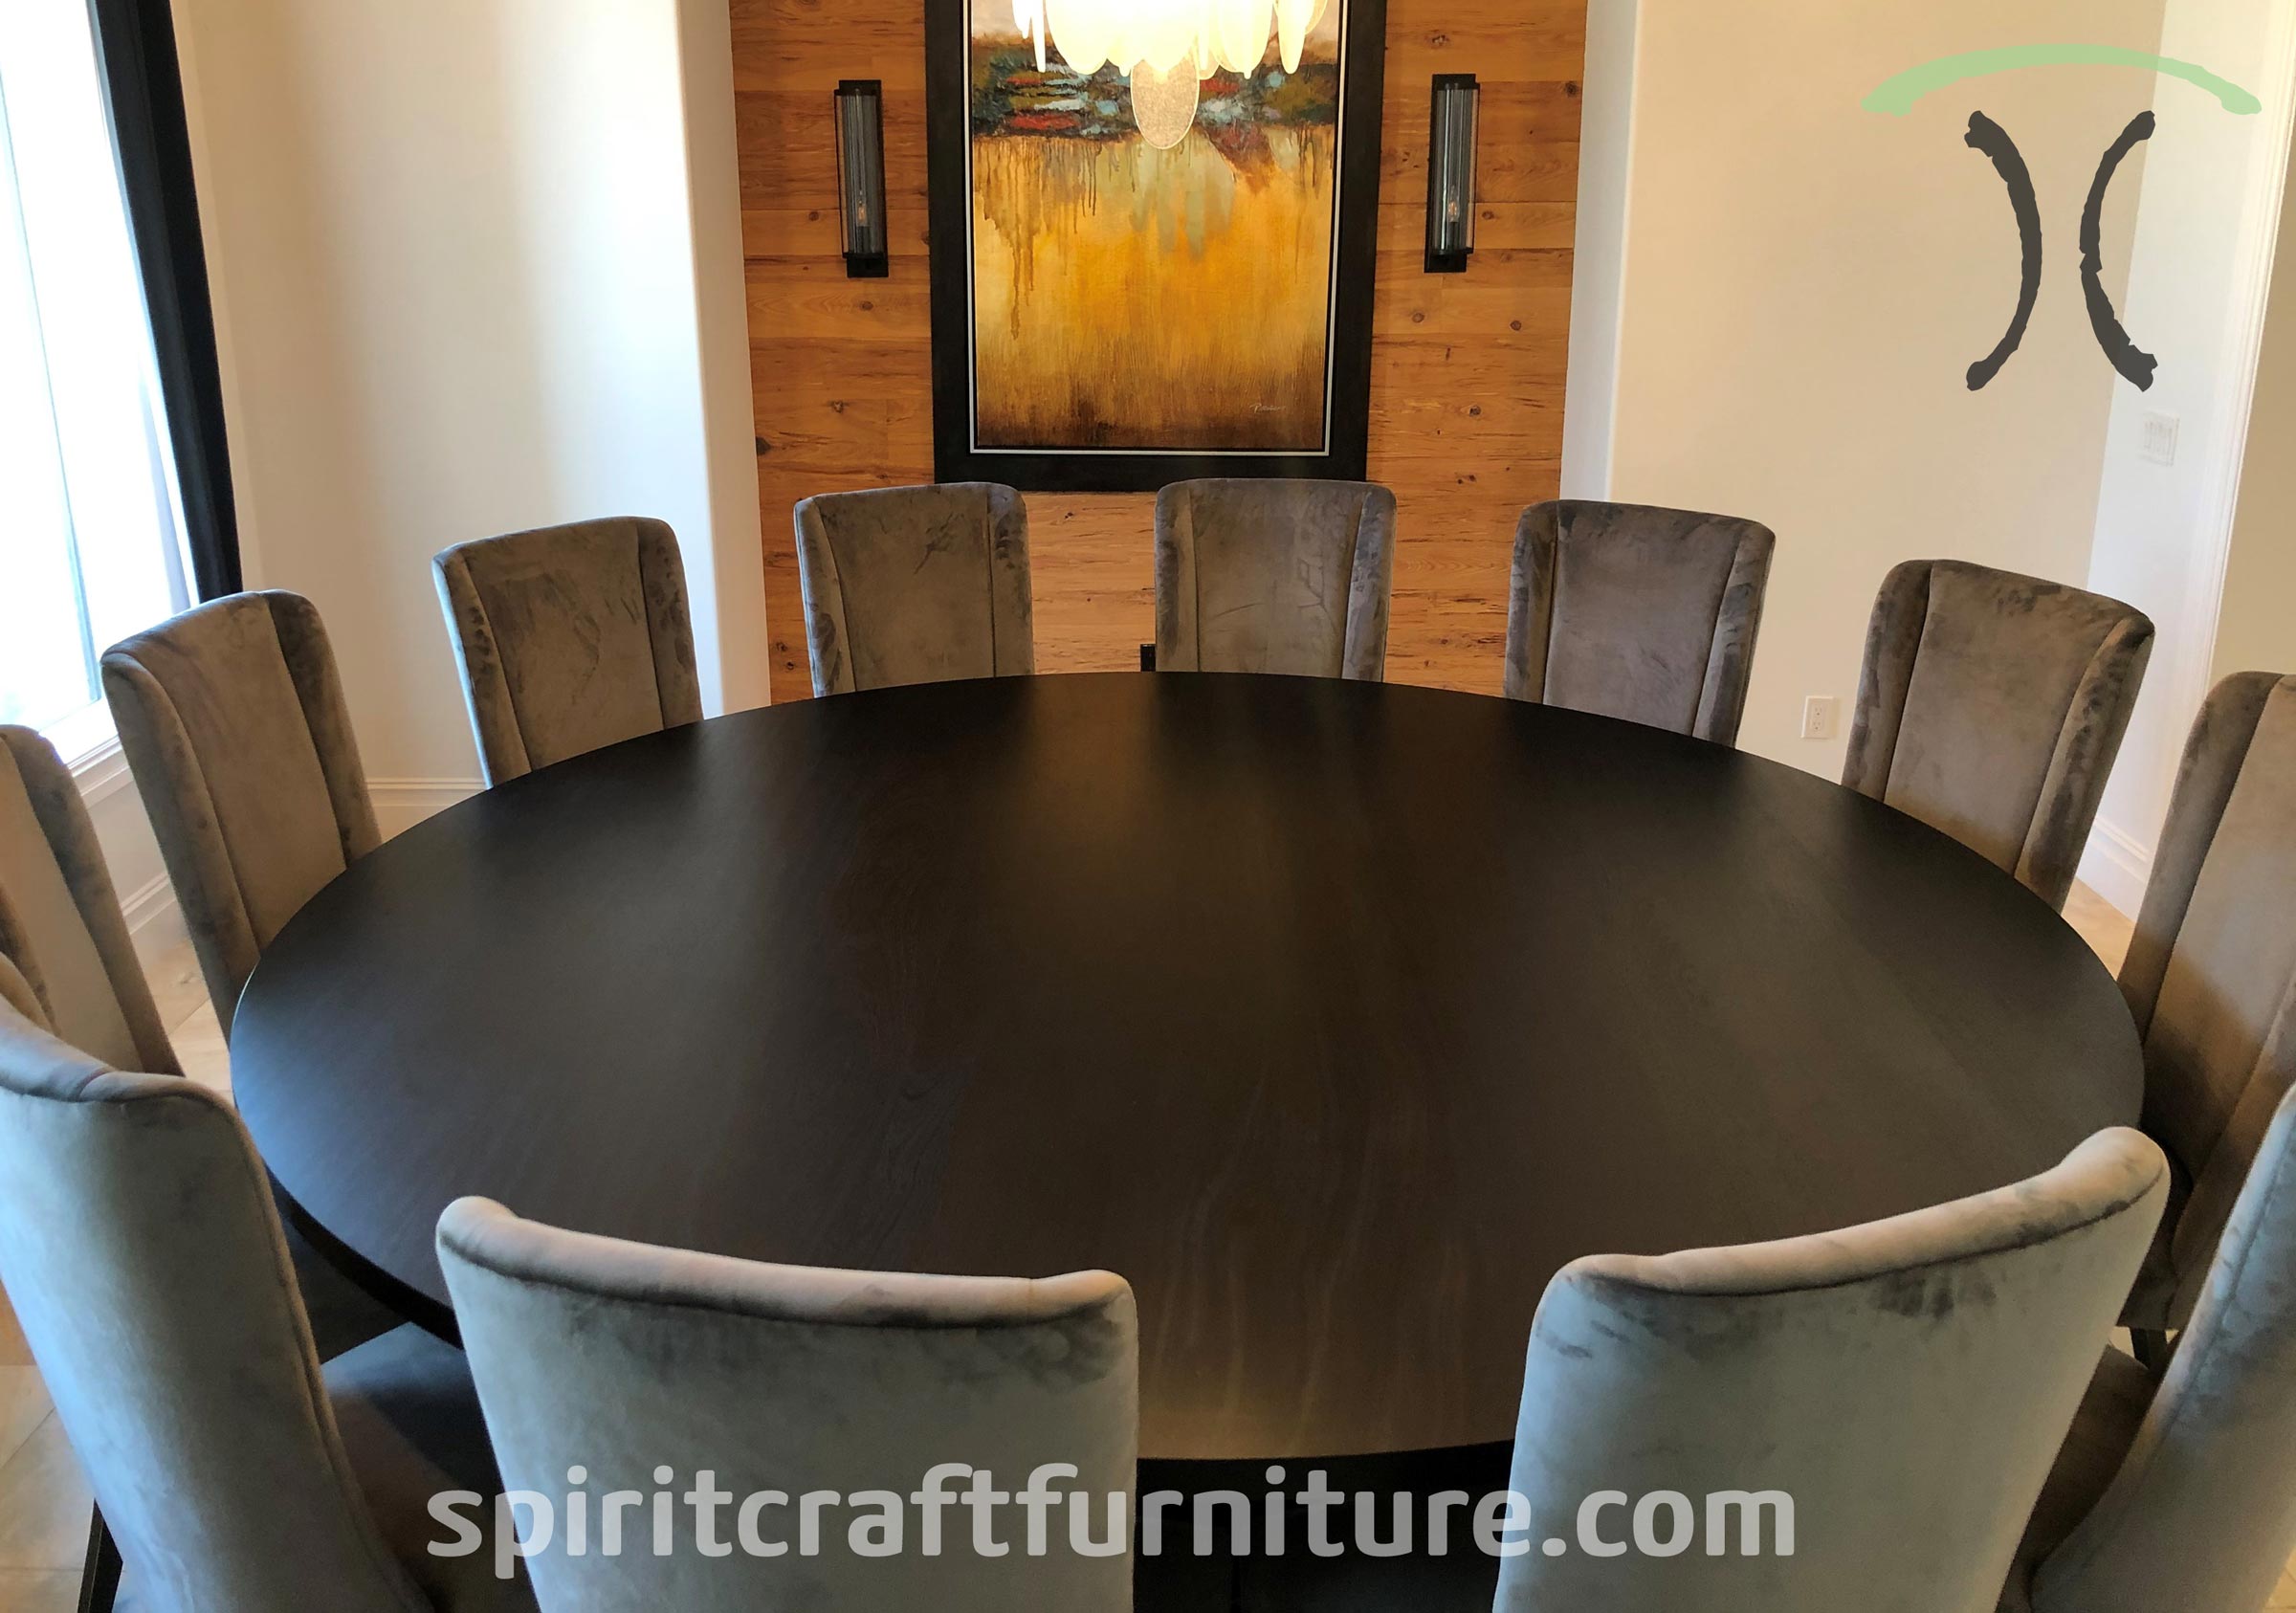 Round Custom Made Solid Wood Dining, Extra Large Round Dining Table Seats 8